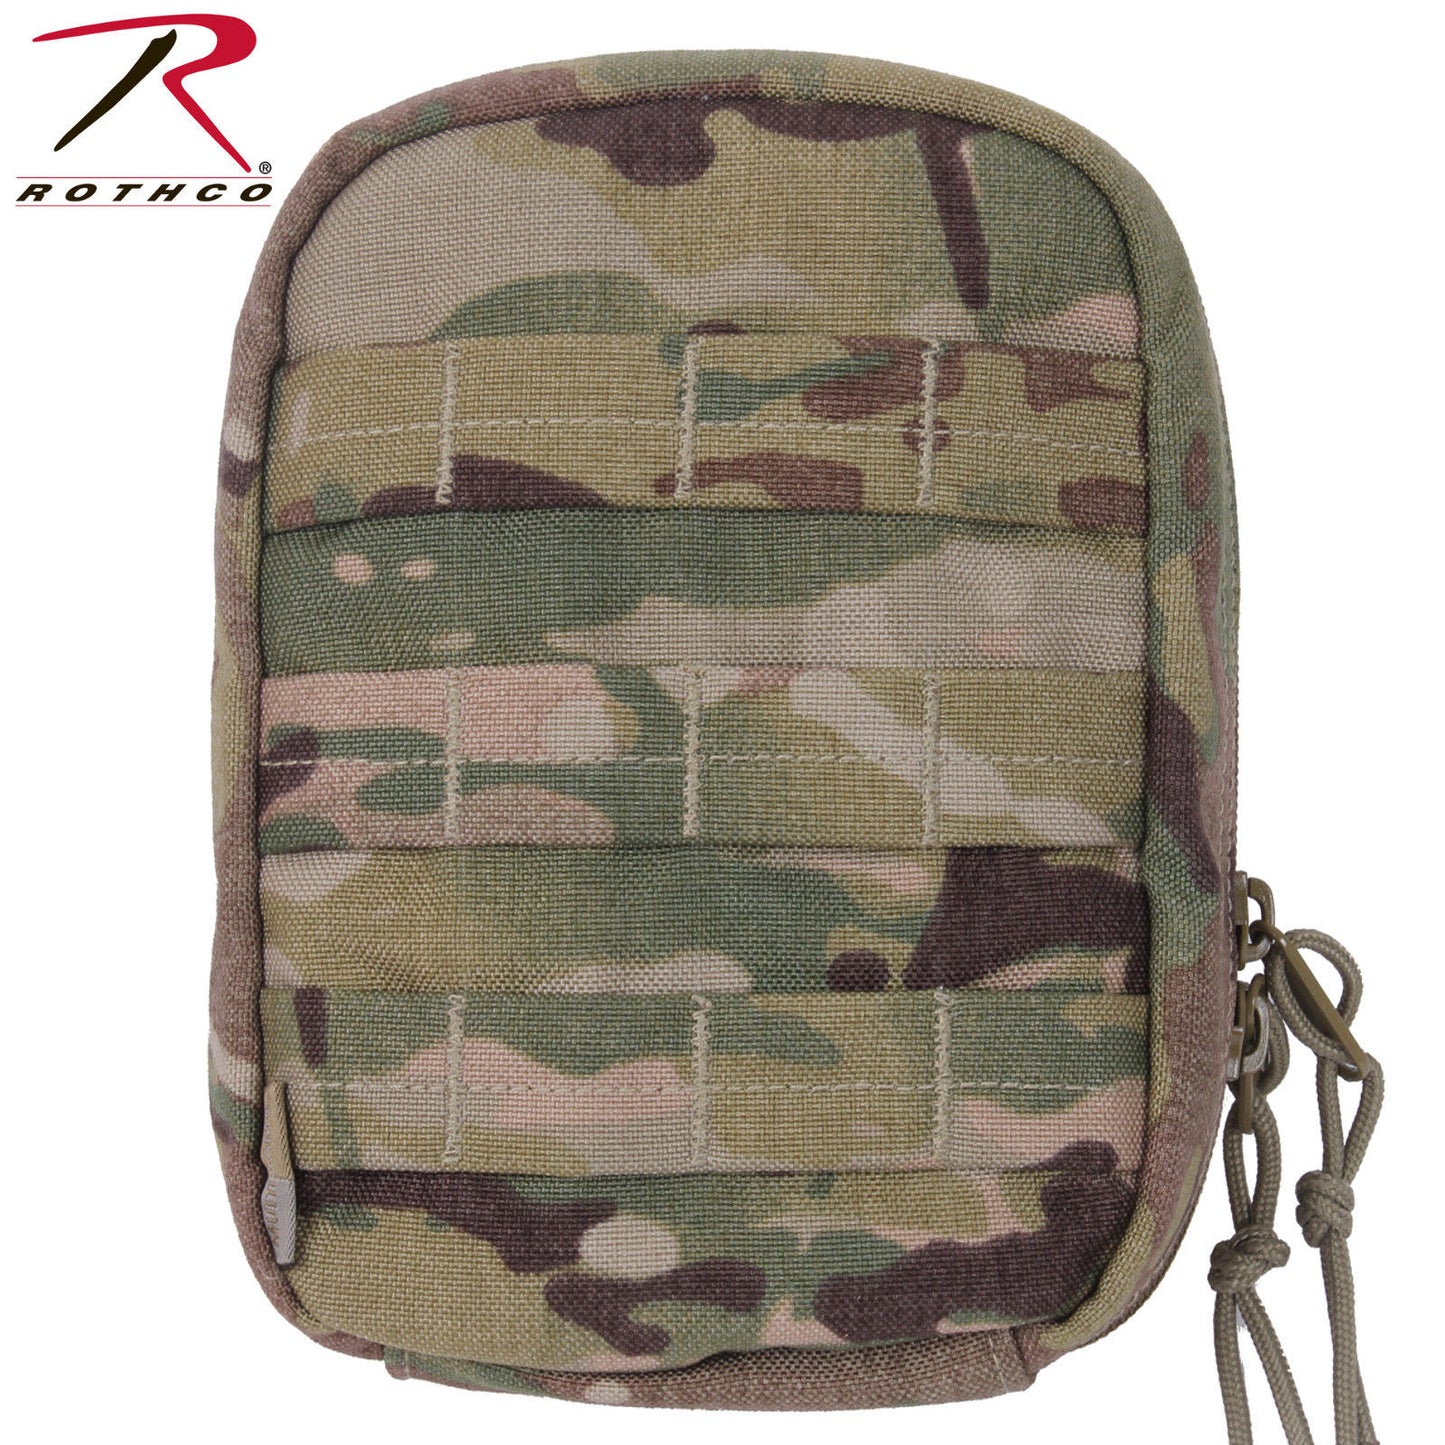 Rothco MultiCam MOLLE Tactical Trauma & First Aid Kit - Pouch Only (No Supplies)